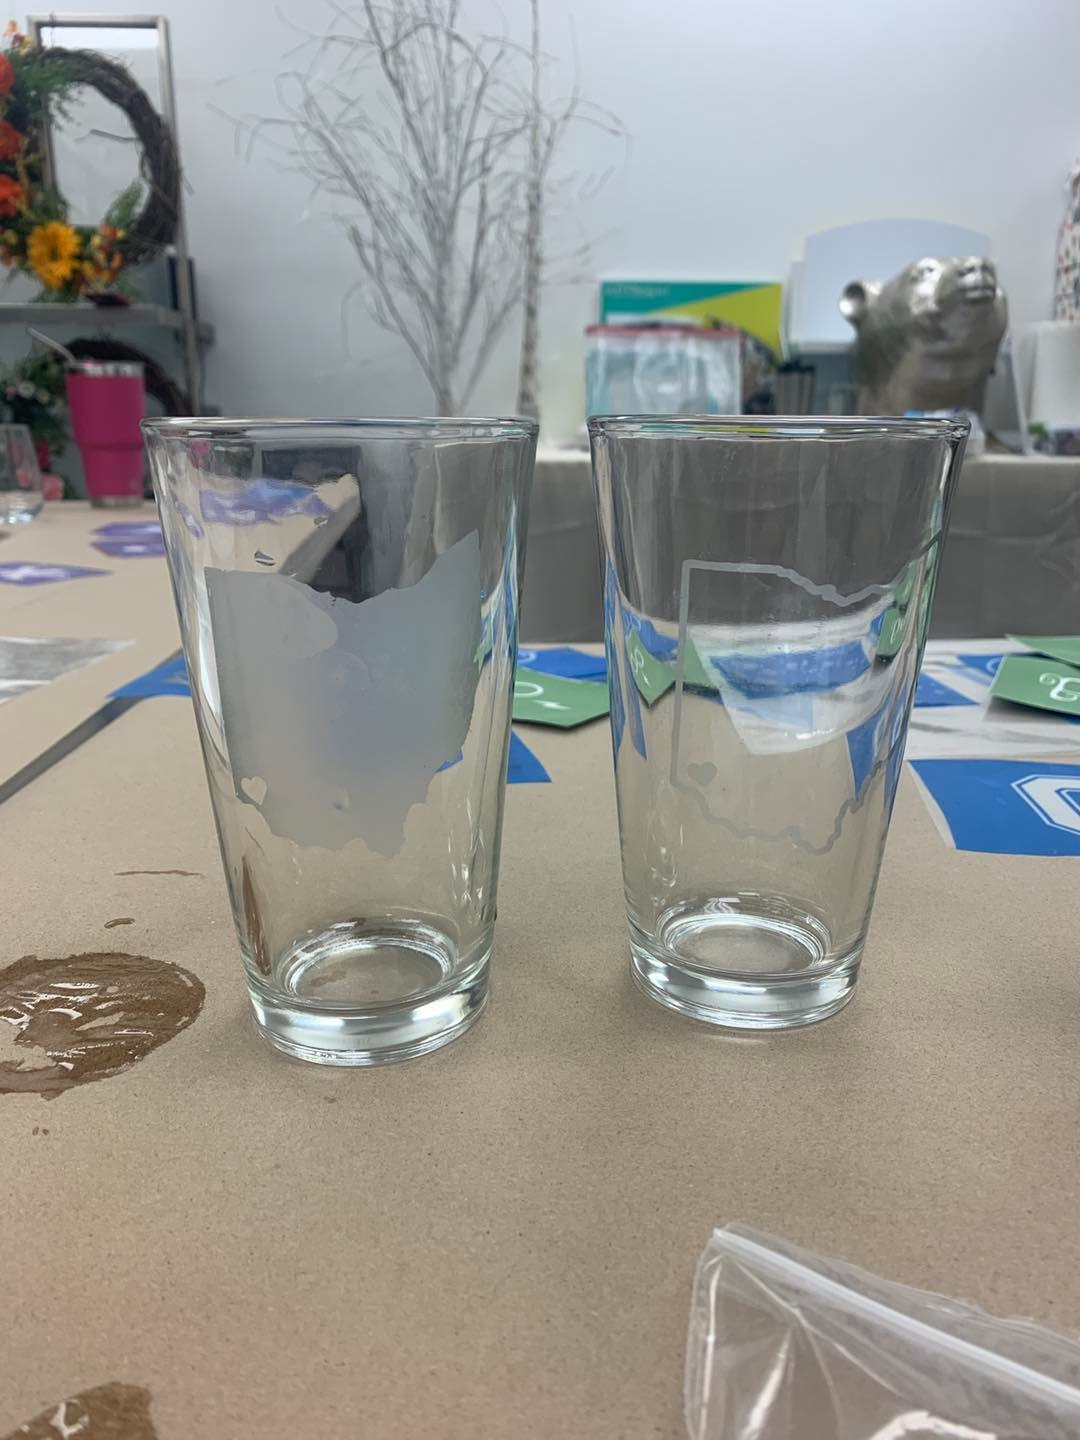 Local Cincinnati Etched Glass Workshop with Creative At Home Art November 30th, 6-8pm at Deerfield--Lemons and Limes Boutique